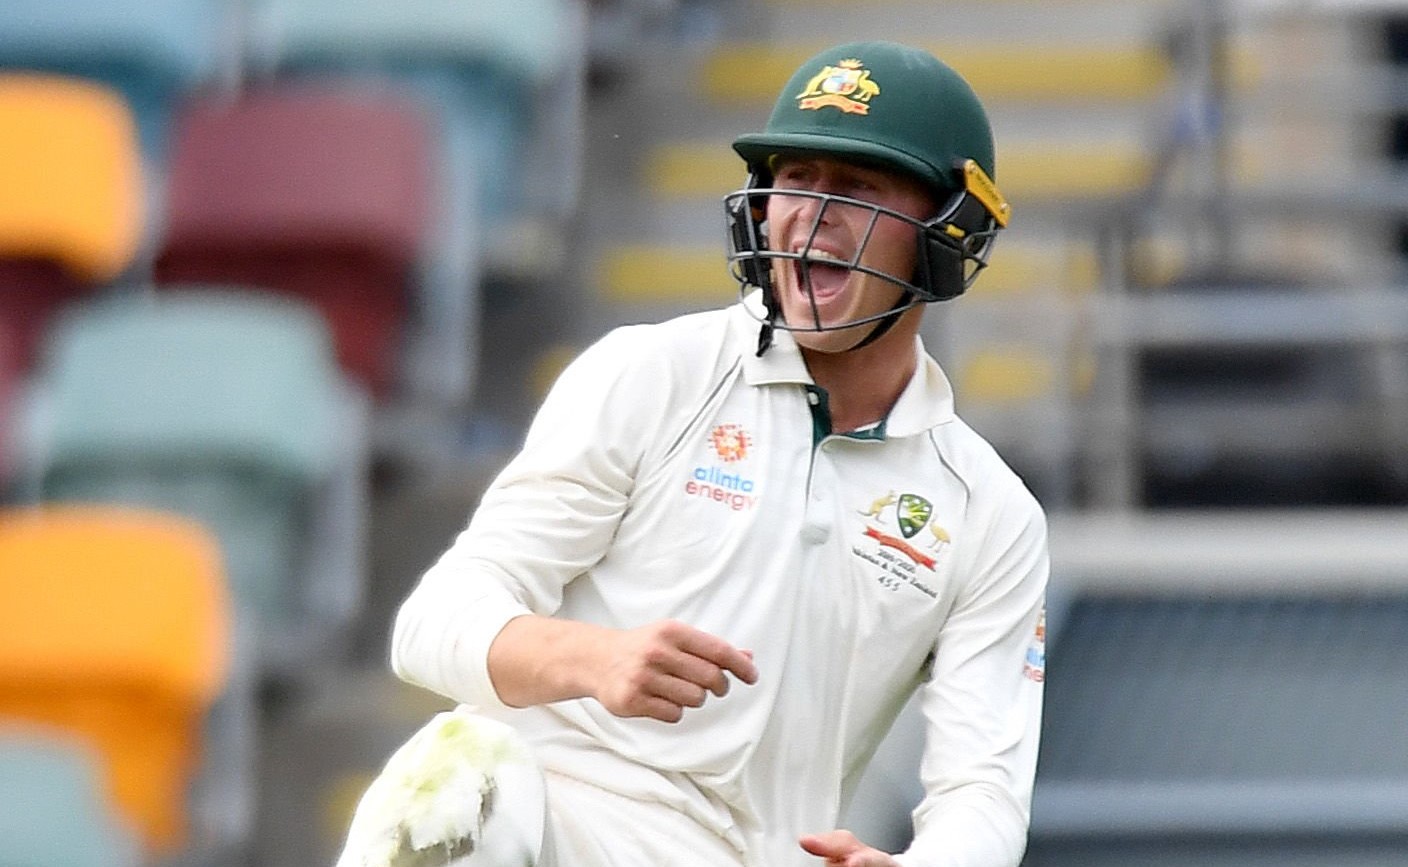 BRISBANE, AUSTRALIA - NOVEMBER 24: Marnus Labuschagne of Australia appeals to the umpire after he thought he'd taken a catch but is denied by the third umpire during day four of the 1st Domain Test between Australia and Pakistan at The Gabba on November 24, 2019 in Brisbane, Australia. (Photo by Bradley Kanaris/Getty Images)